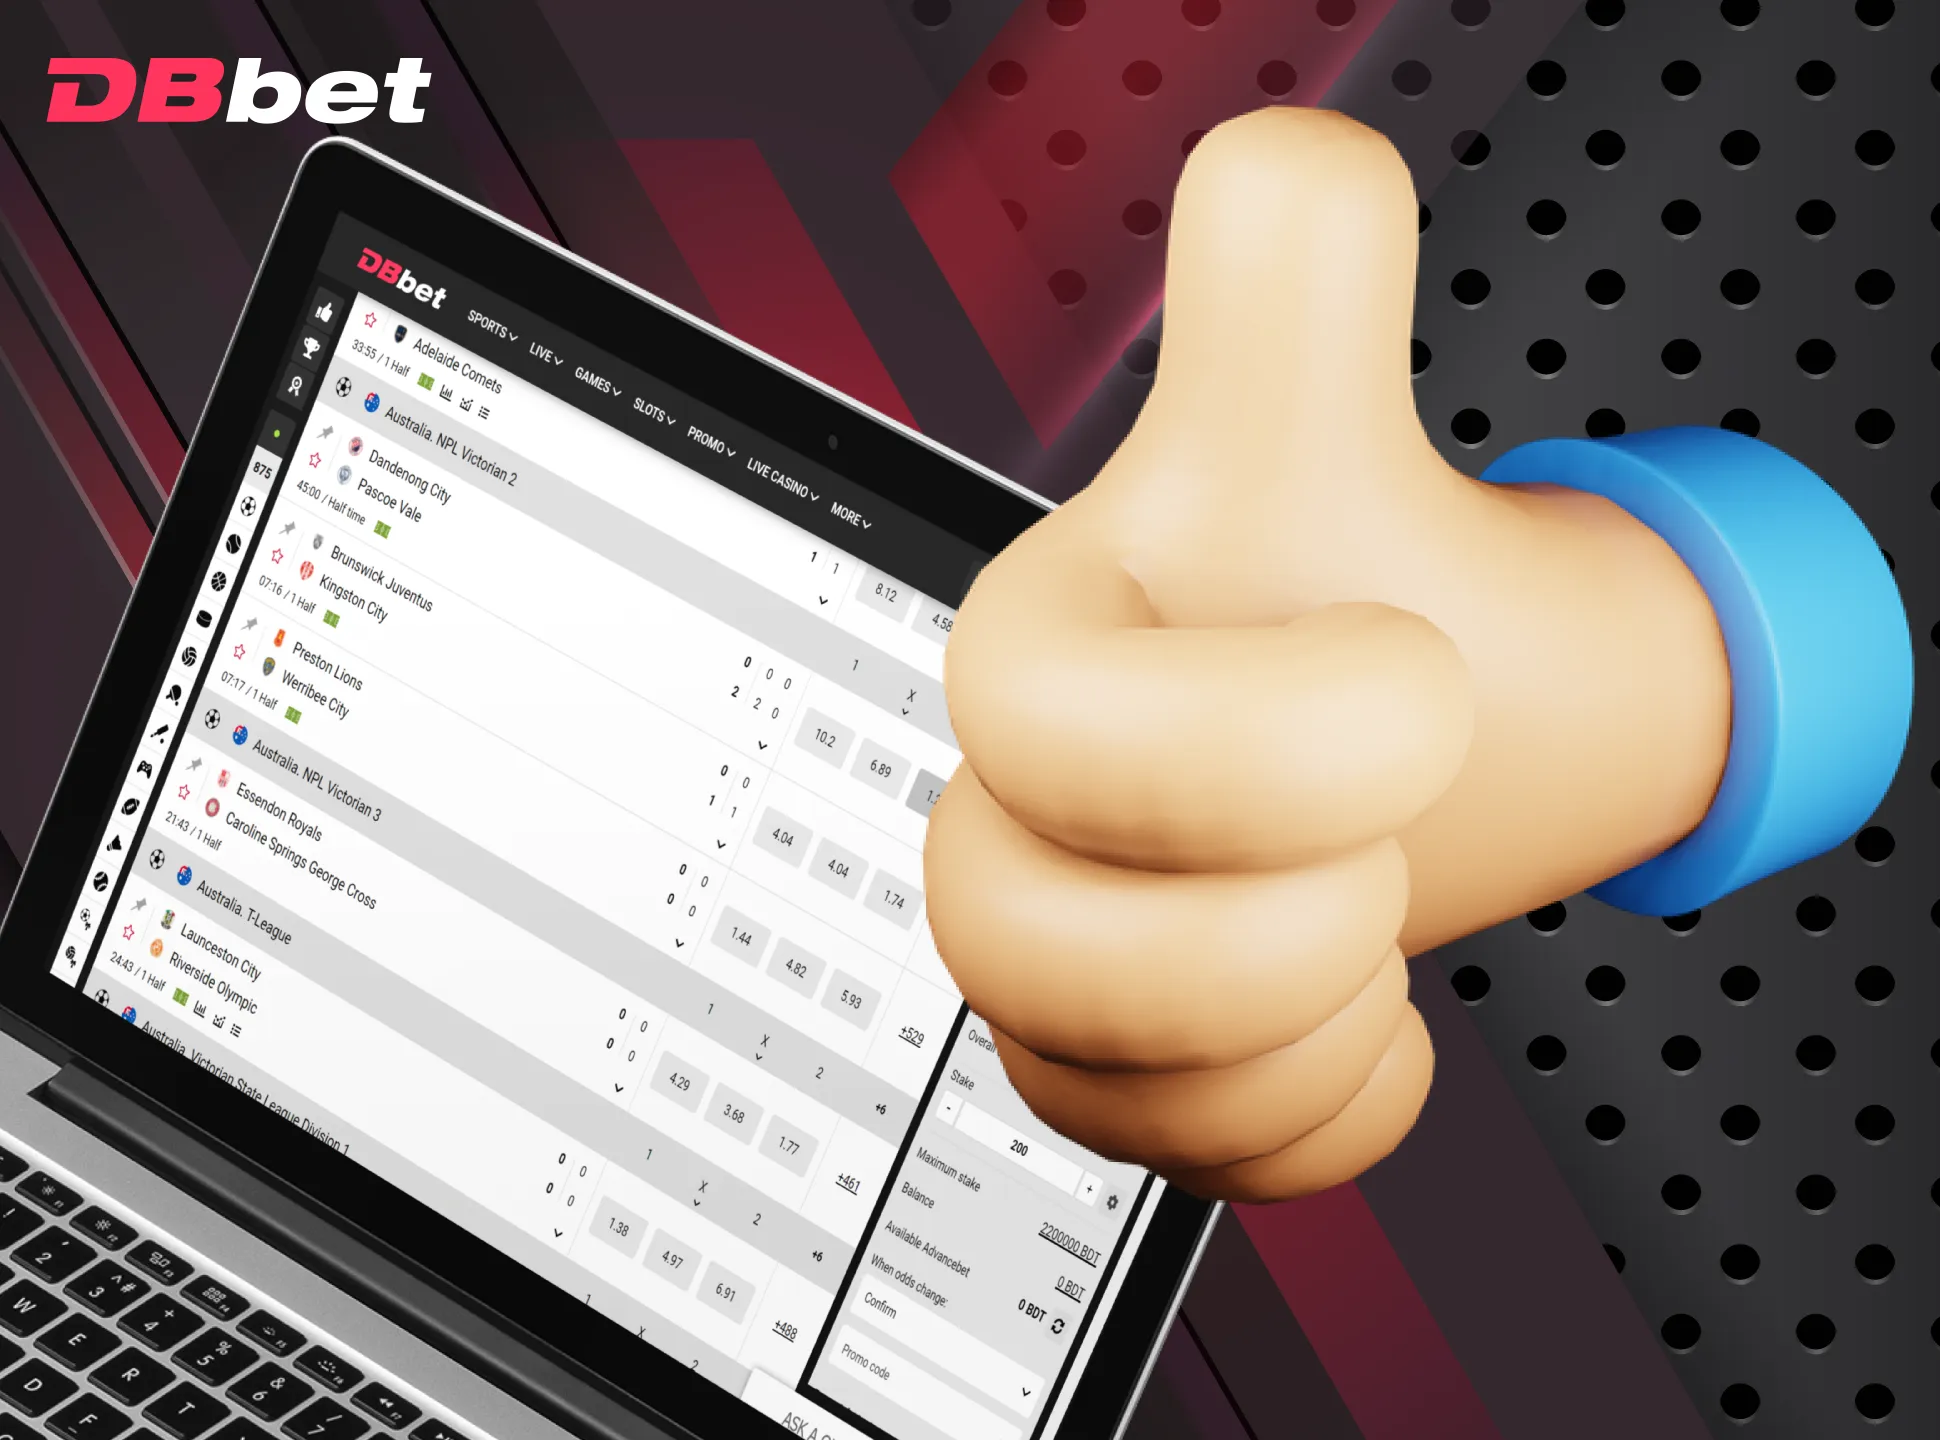 DBbet provides huge variety of sports to bet on and casino games for playing.